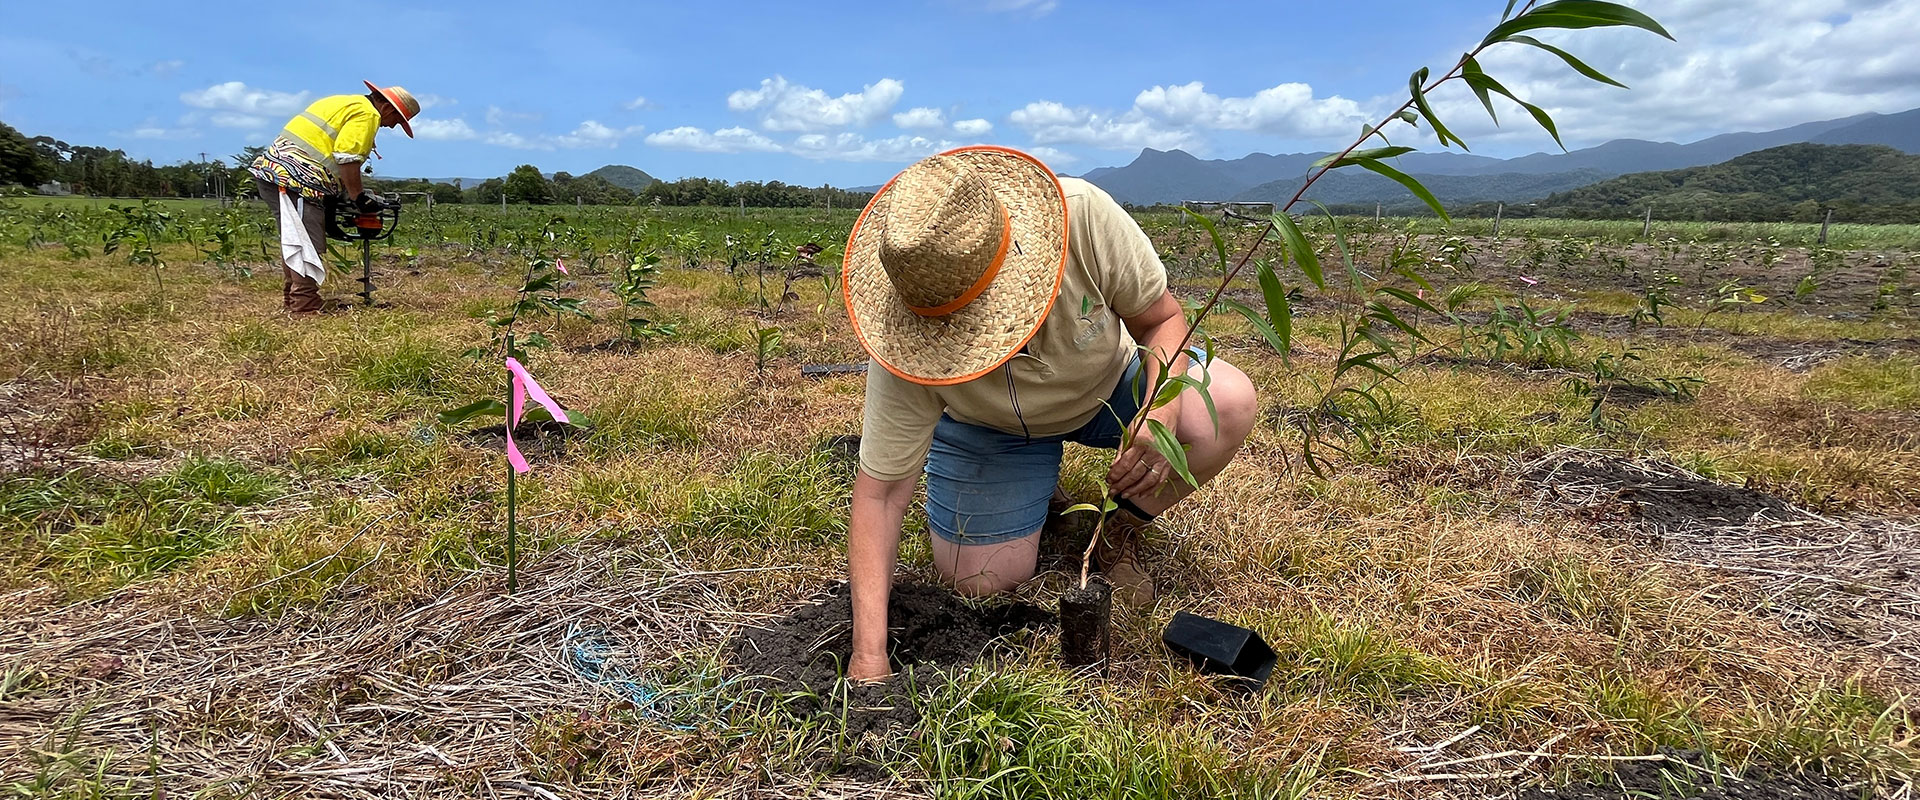 Dave and Connie tree planting at the Bells Road site in Lower Daintree.